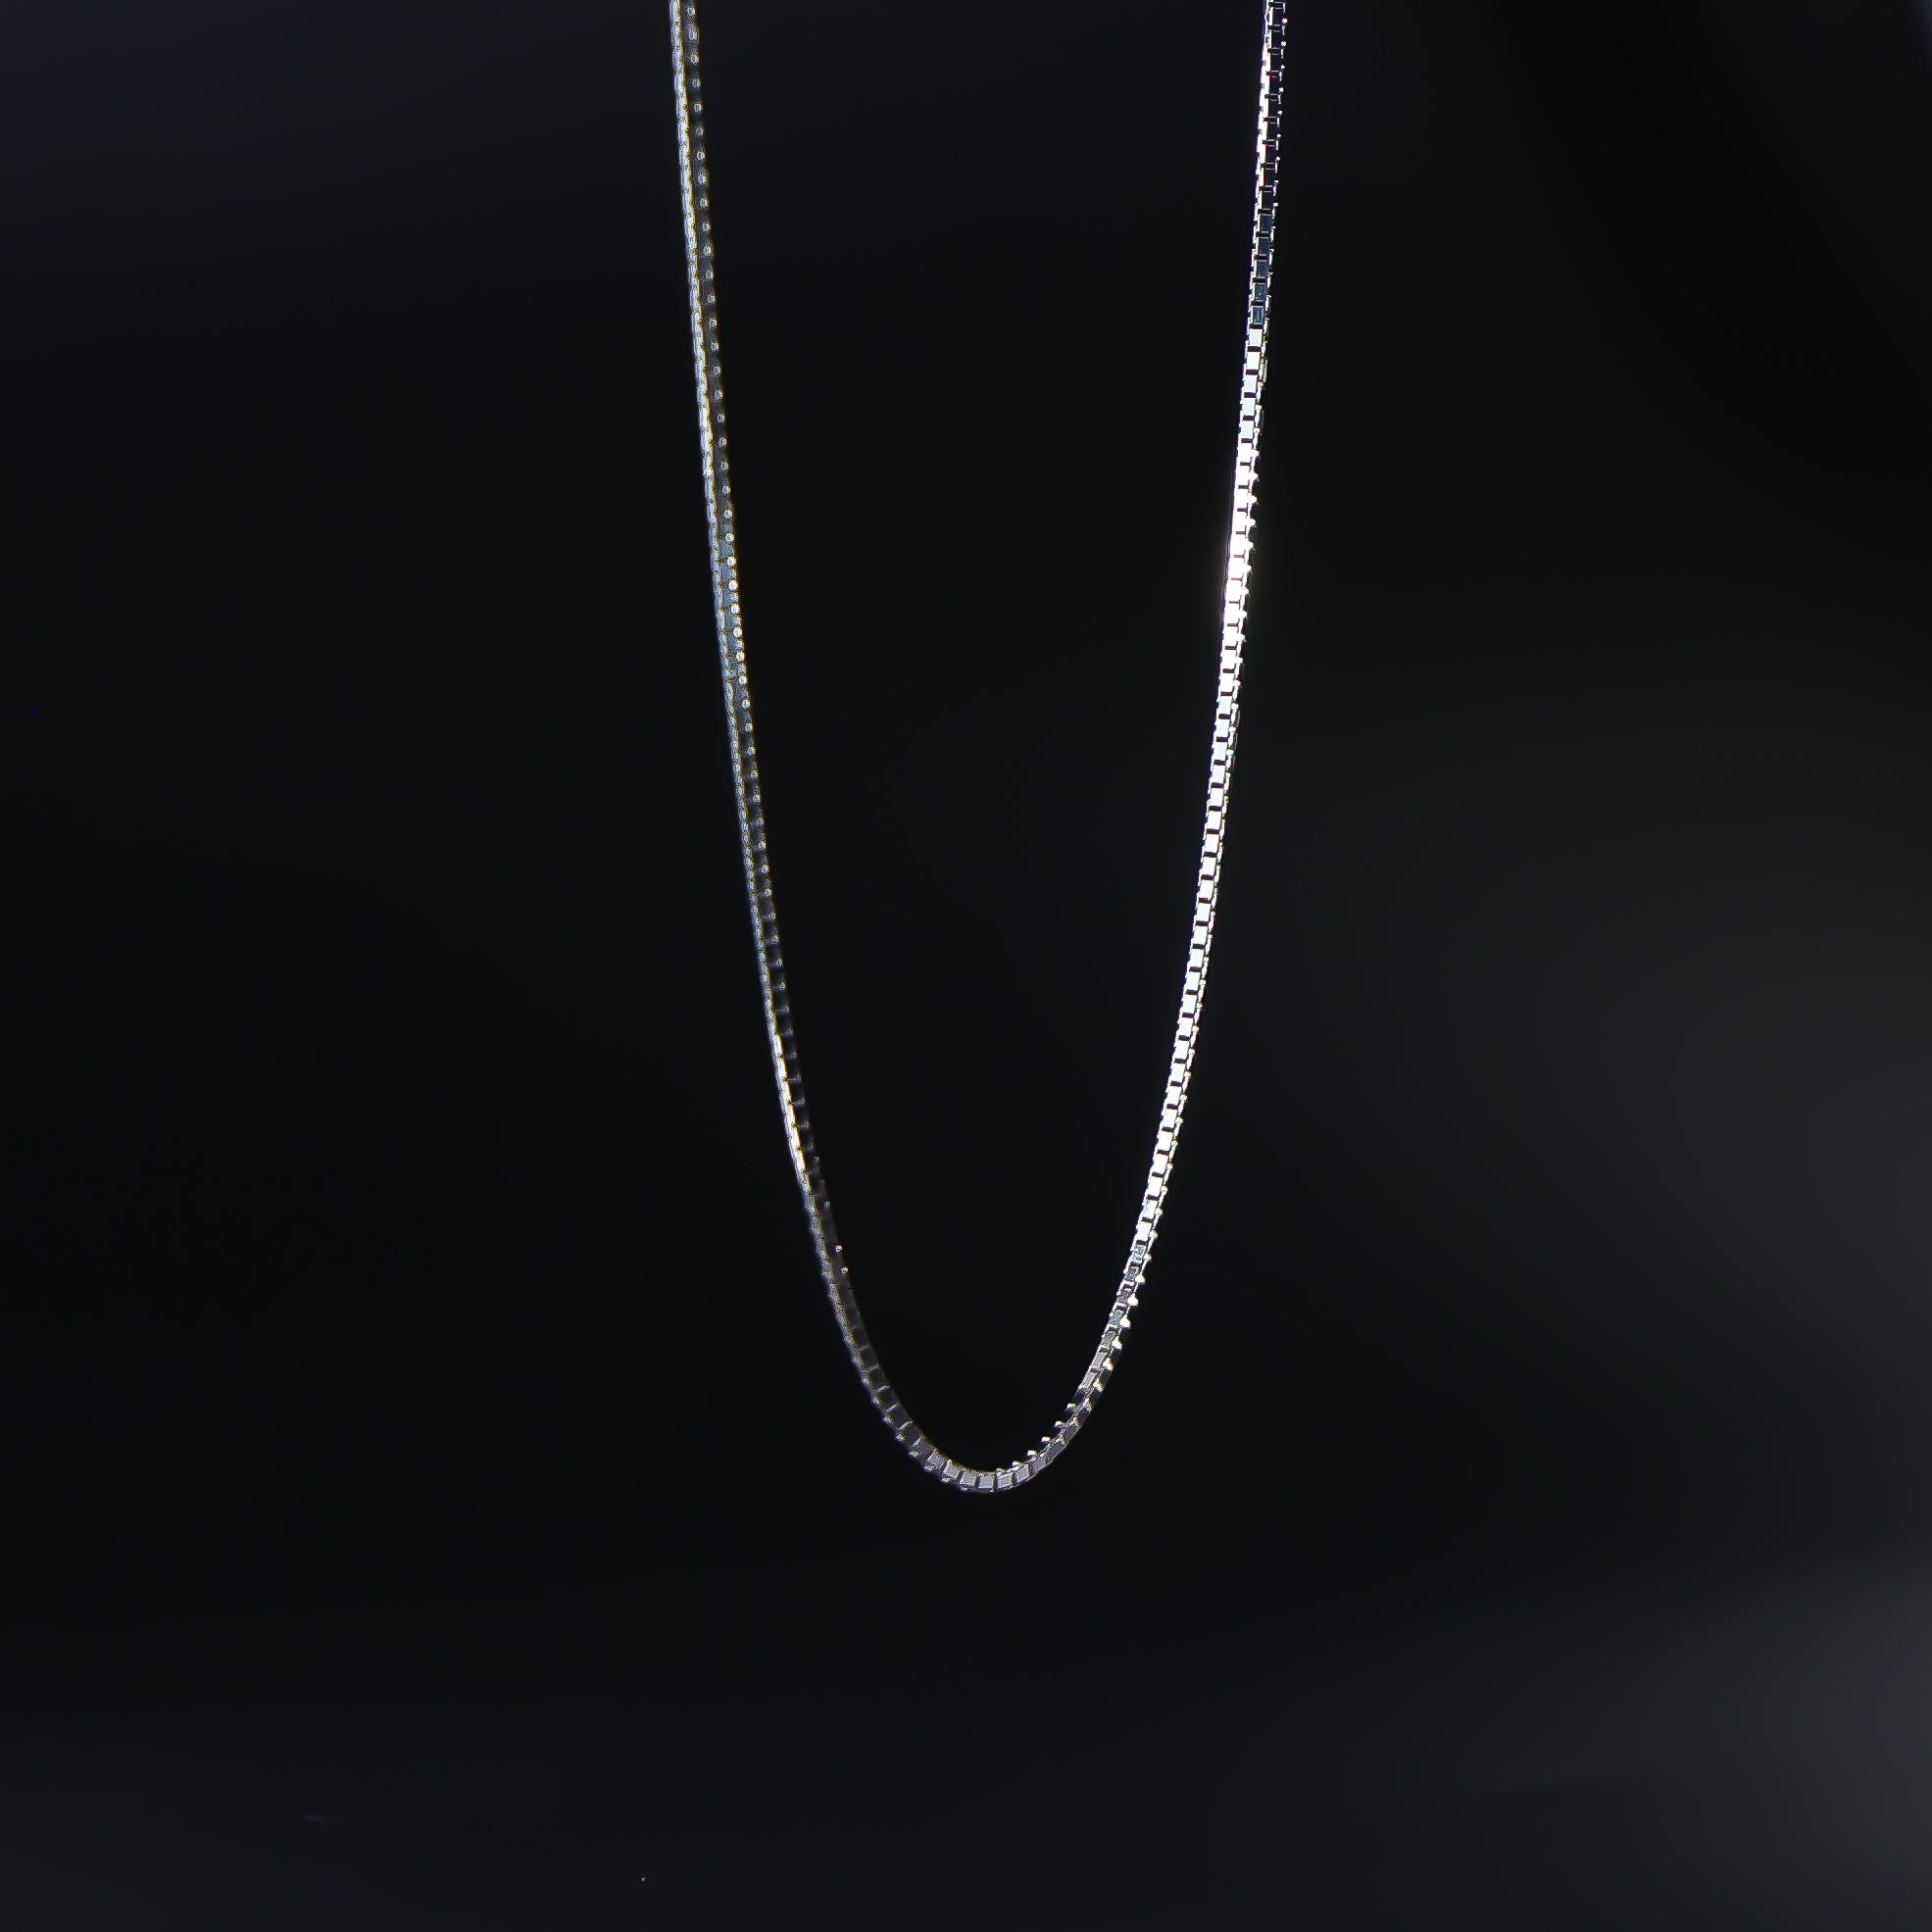 1mm 14K Solid White Gold Box Chain Model-0259 - Charlie & Co. Jewelry